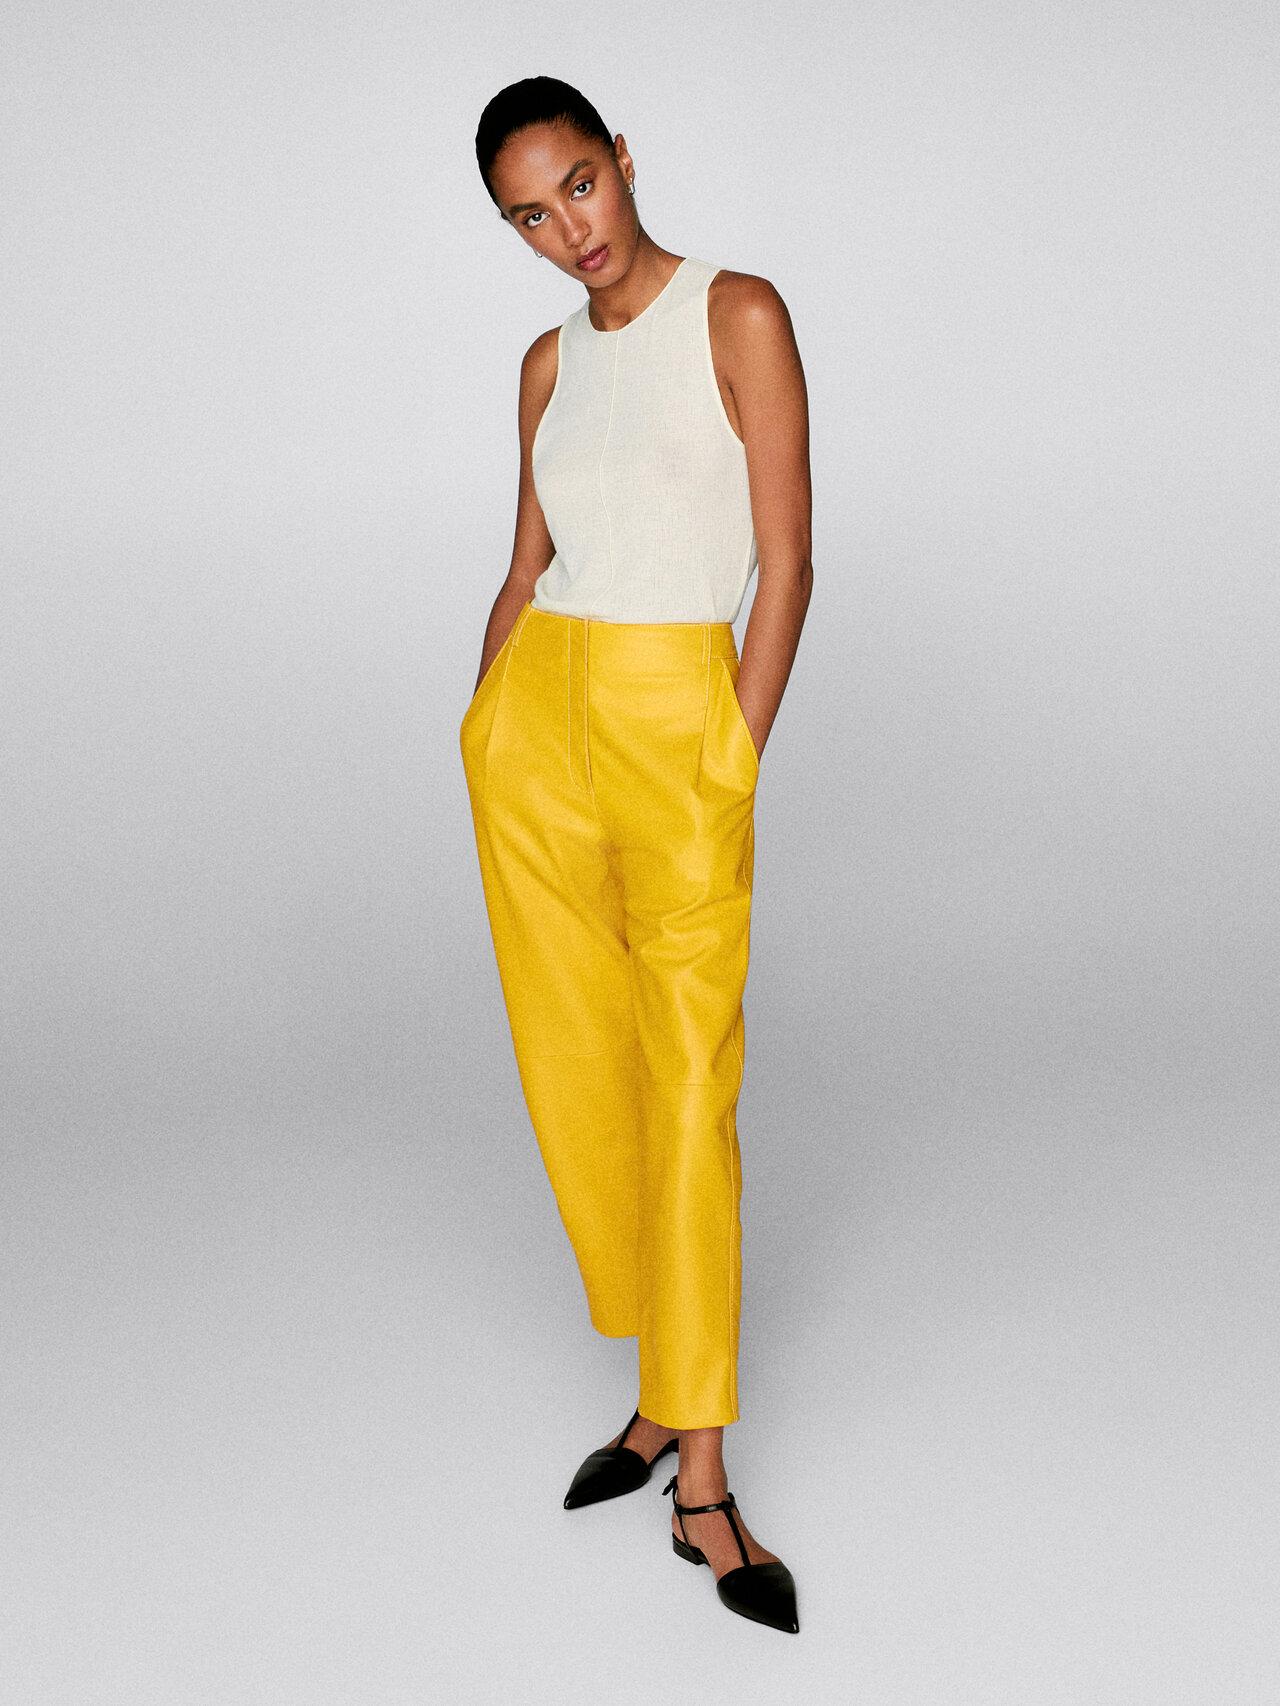 MASSIMO DUTTI Nappa Leather Darted Trousers in Yellow | Lyst